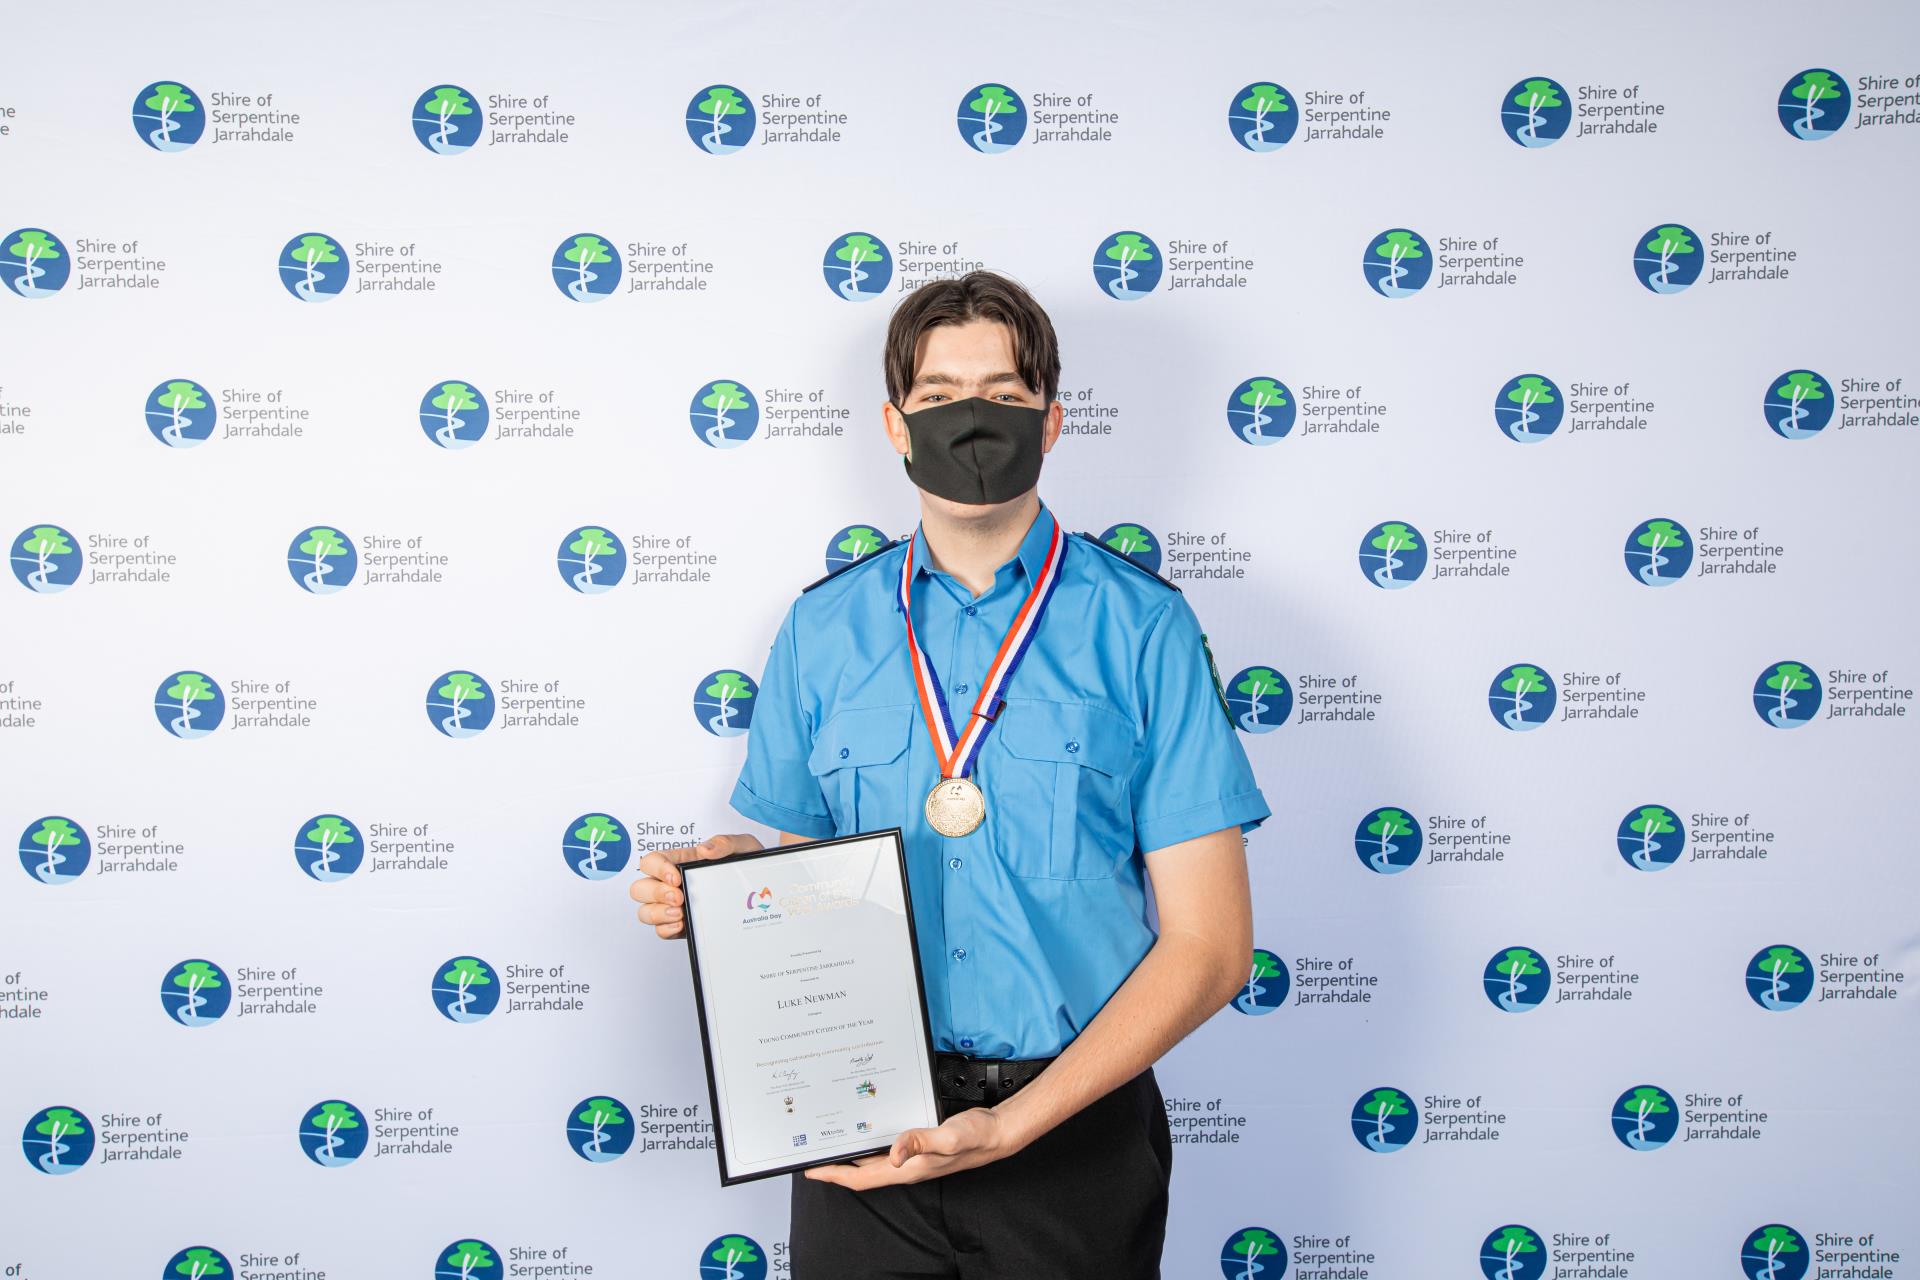 Image containing one young person: Young Citizen of the Year